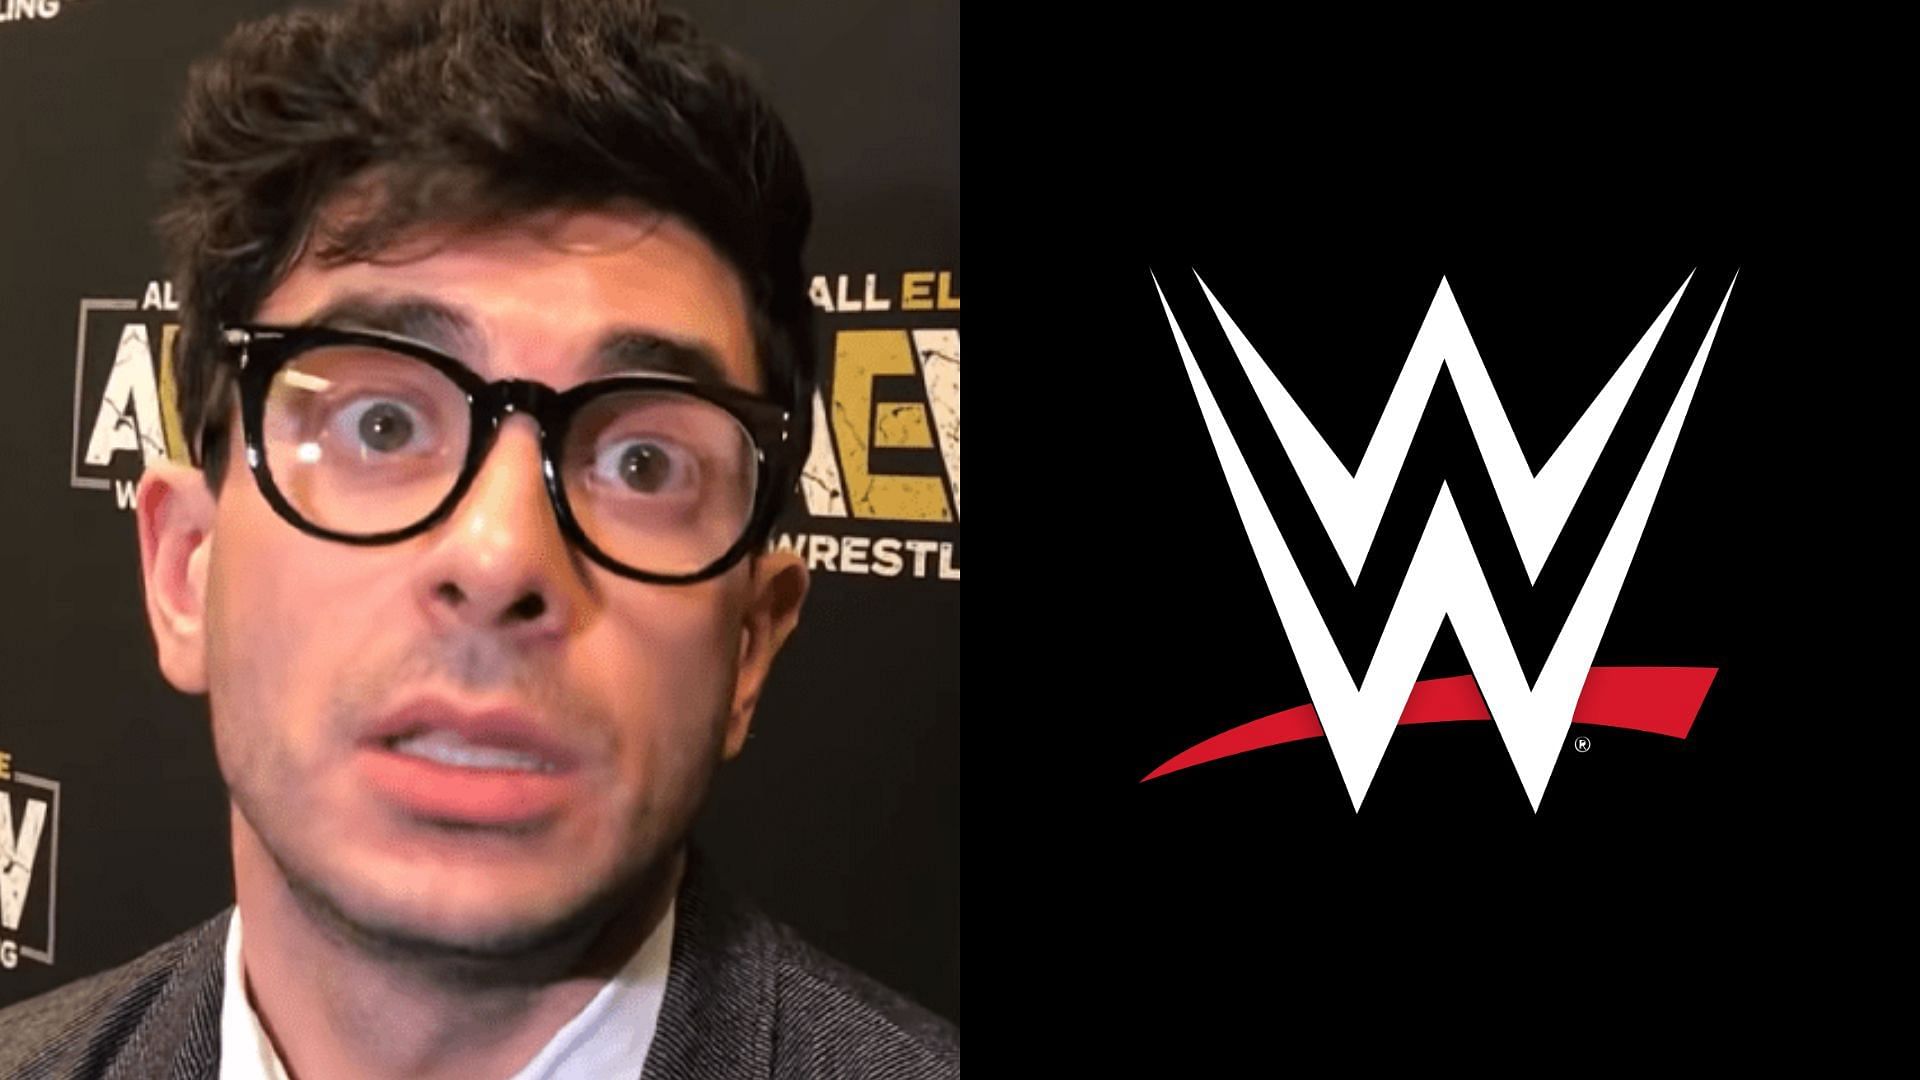 Tony Khan is the president of All Elite Wrestling and WWE is arguably the top wrestling promotion today